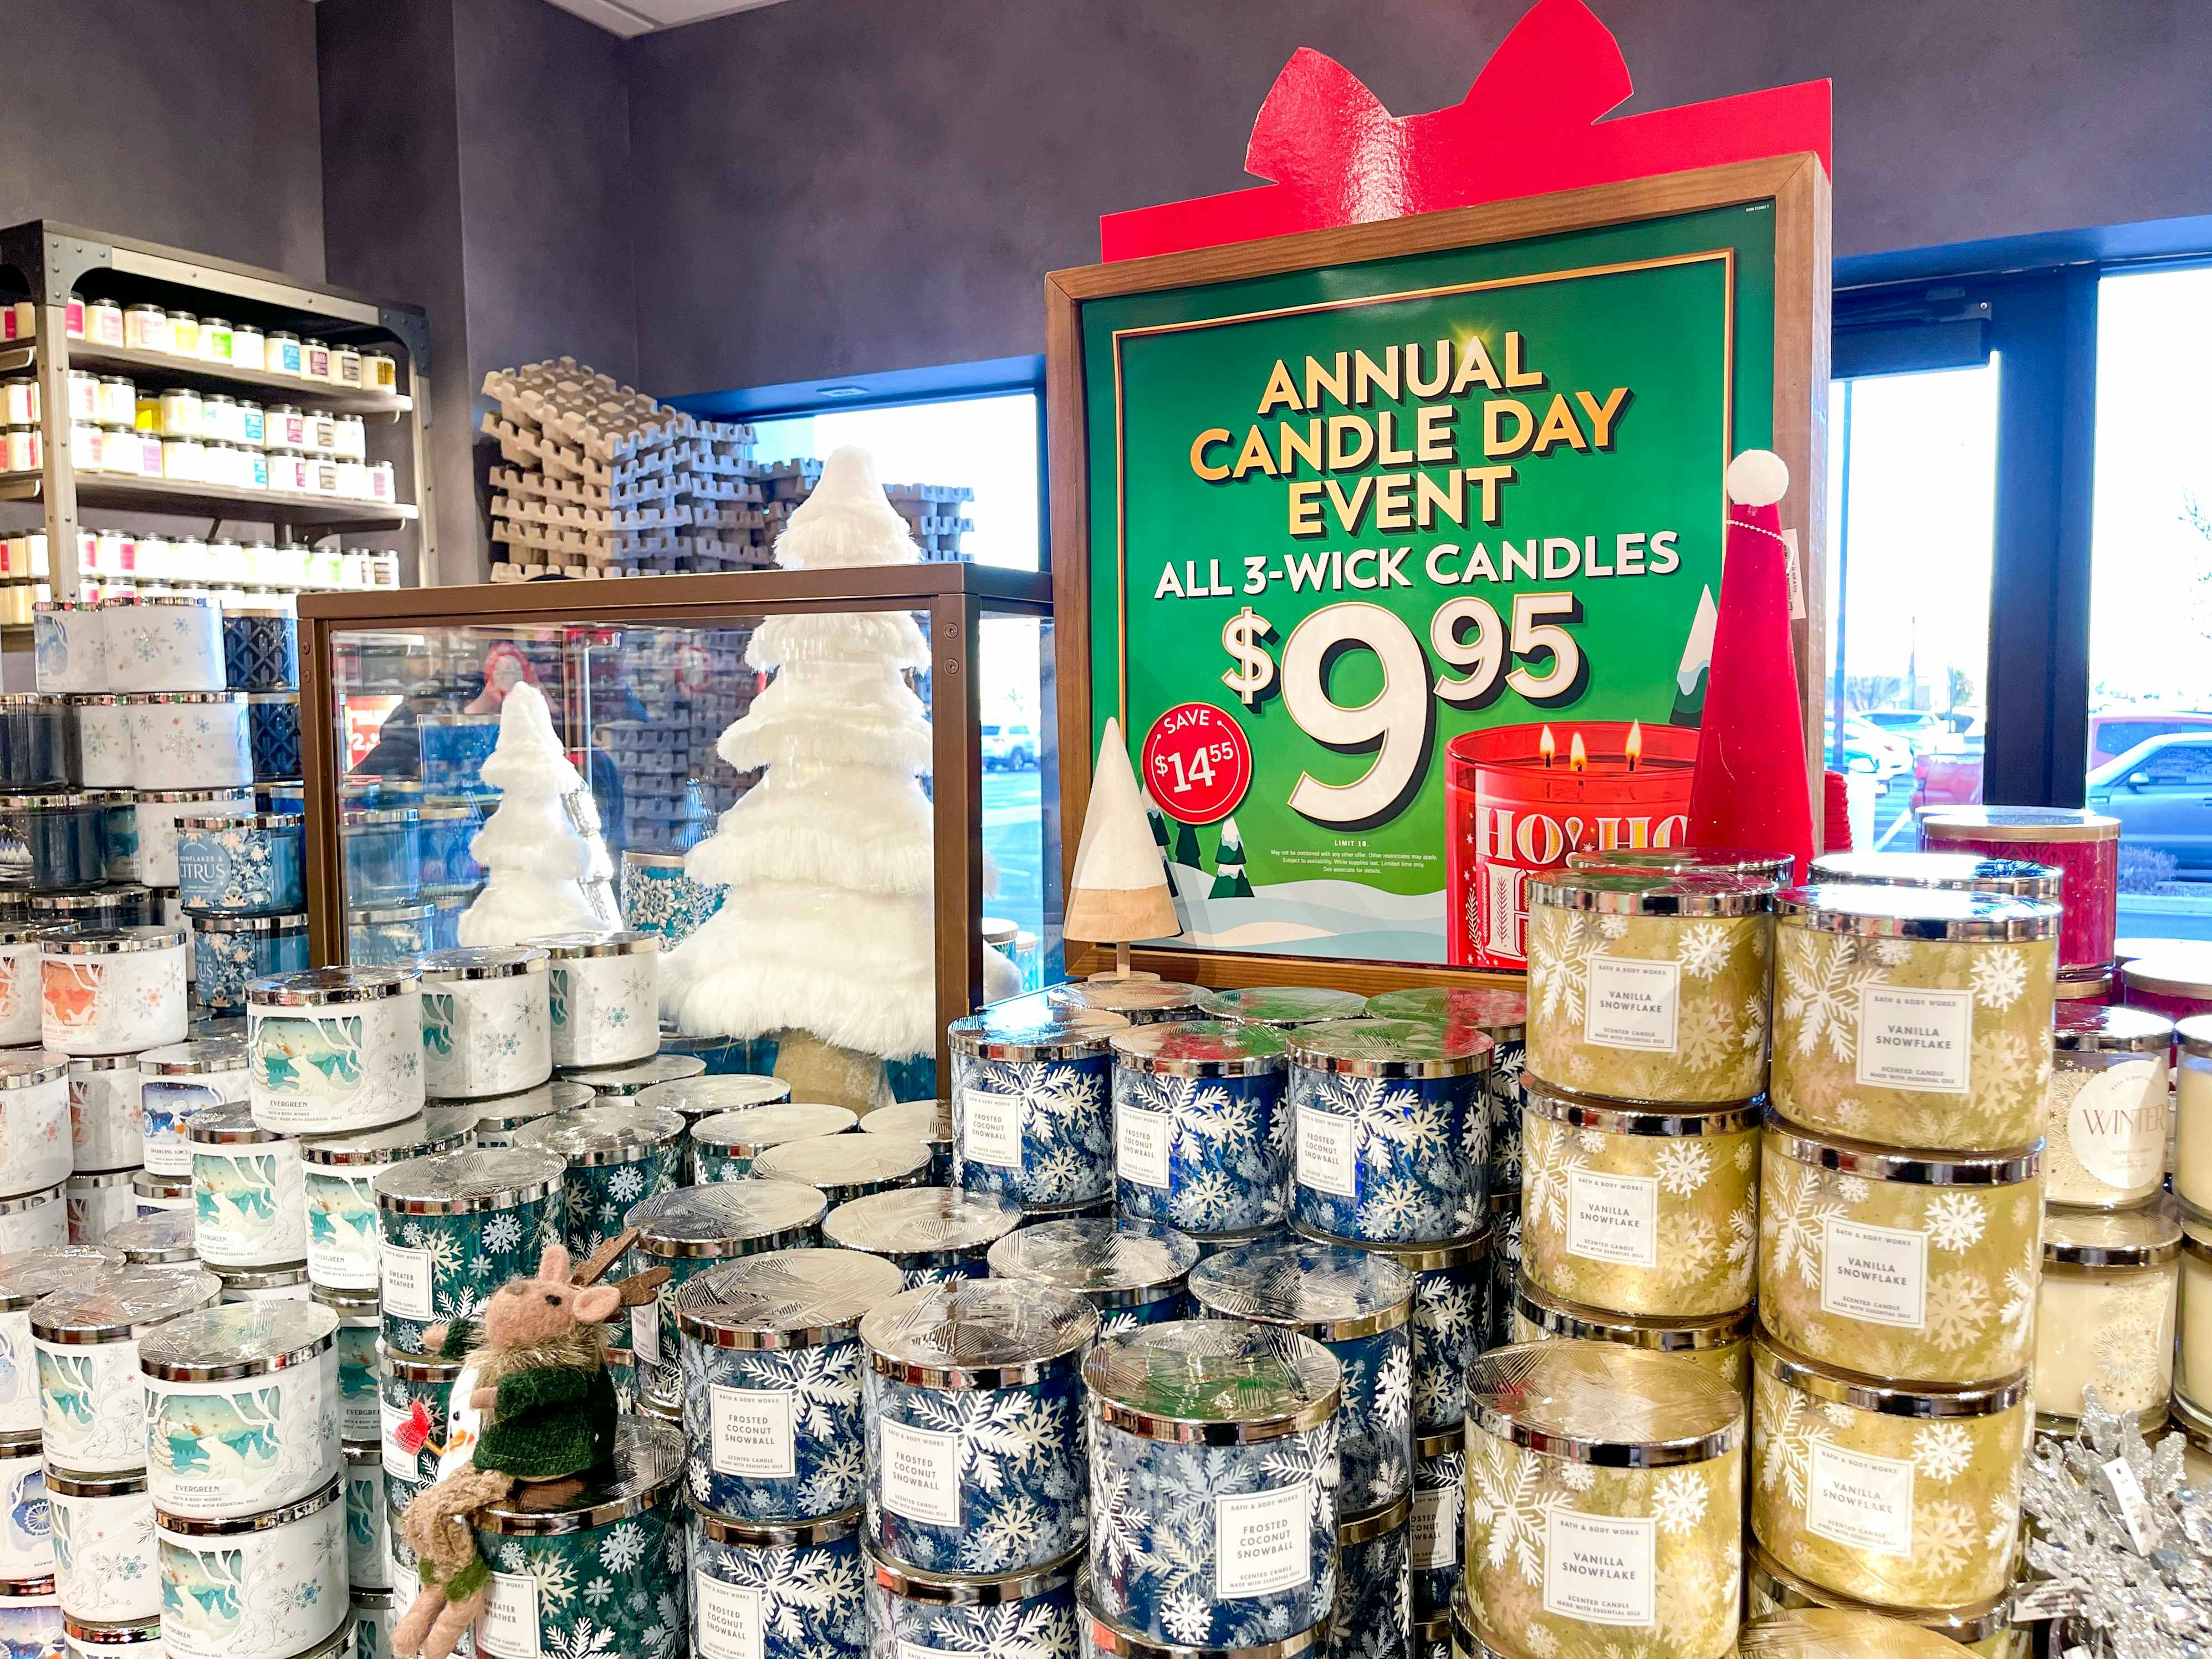 Bath & Body Works Semi-Annual Sale Will Return December 26, 2023 - The  Krazy Coupon Lady